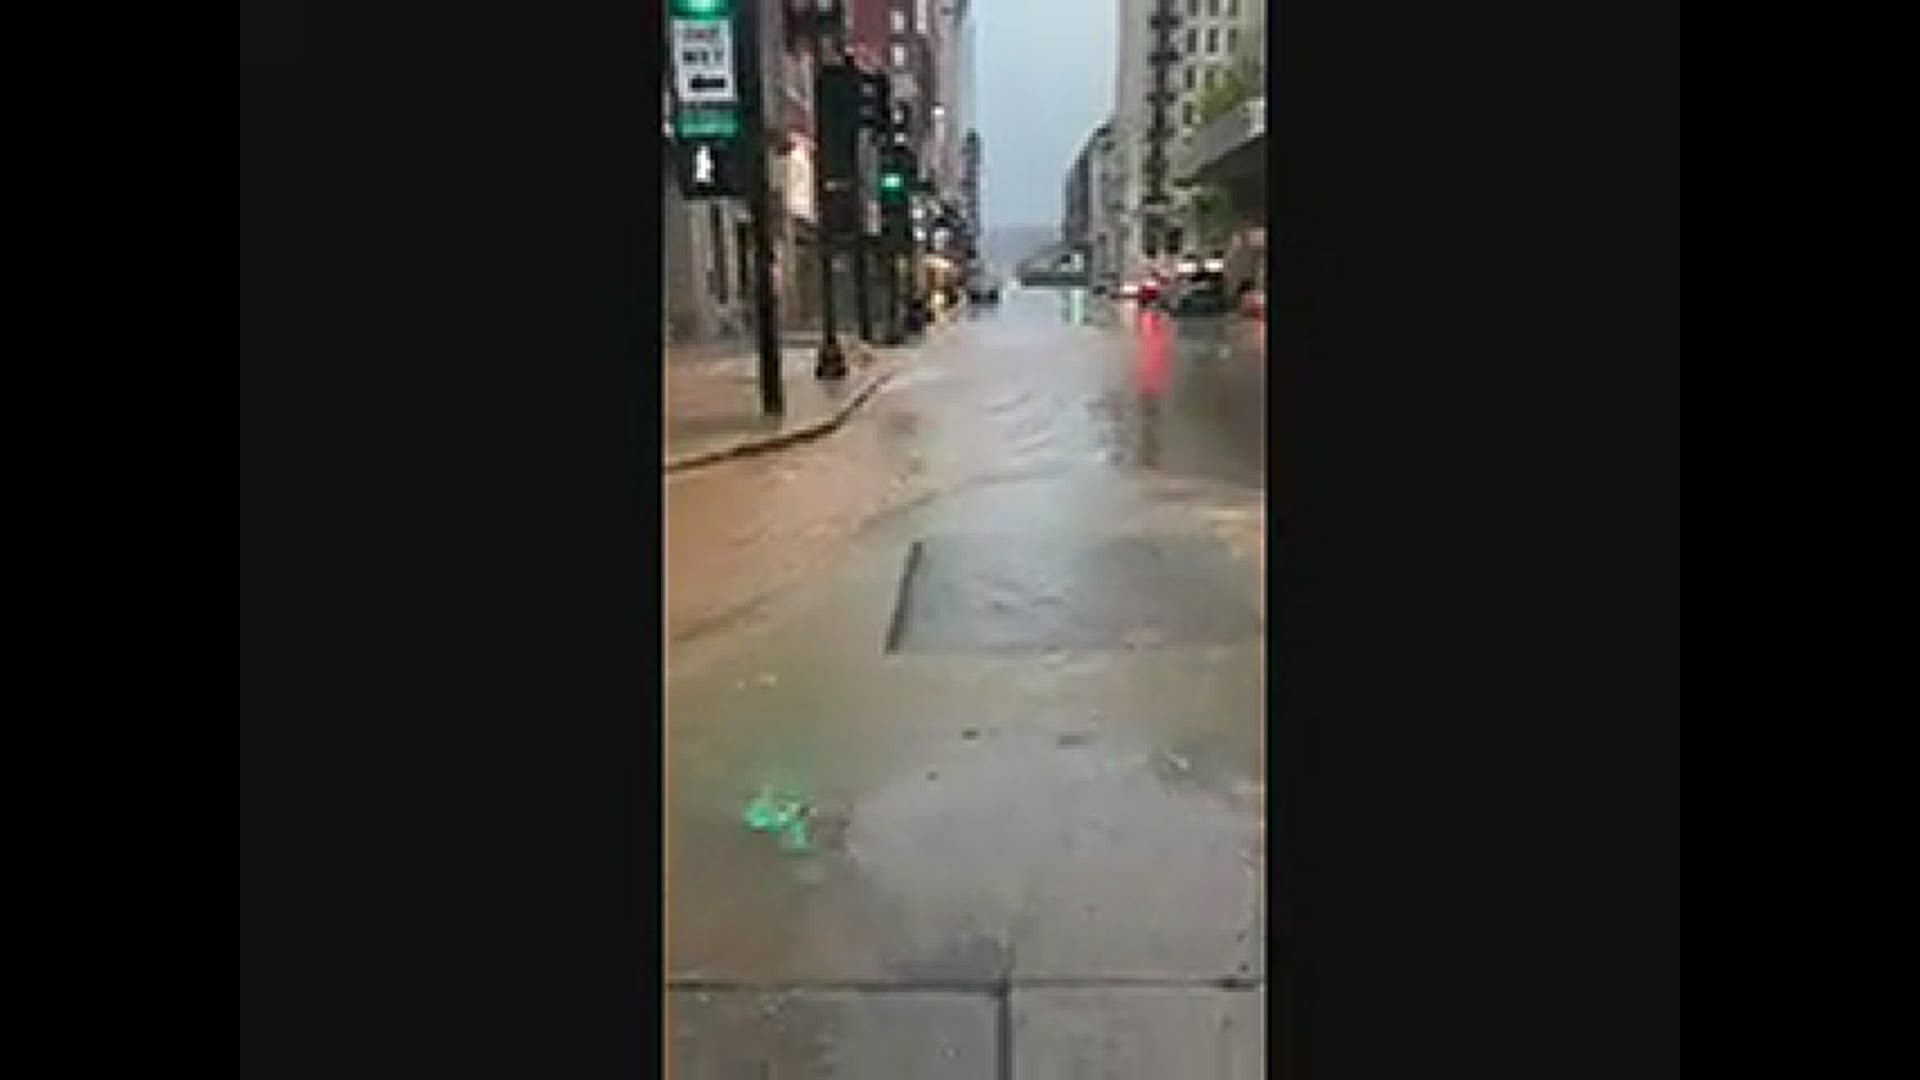 Road flooding in downtown Knoxville at Gay Street and Union Avenue (Video: Greg Phipps)
Credit: Greg Phipps